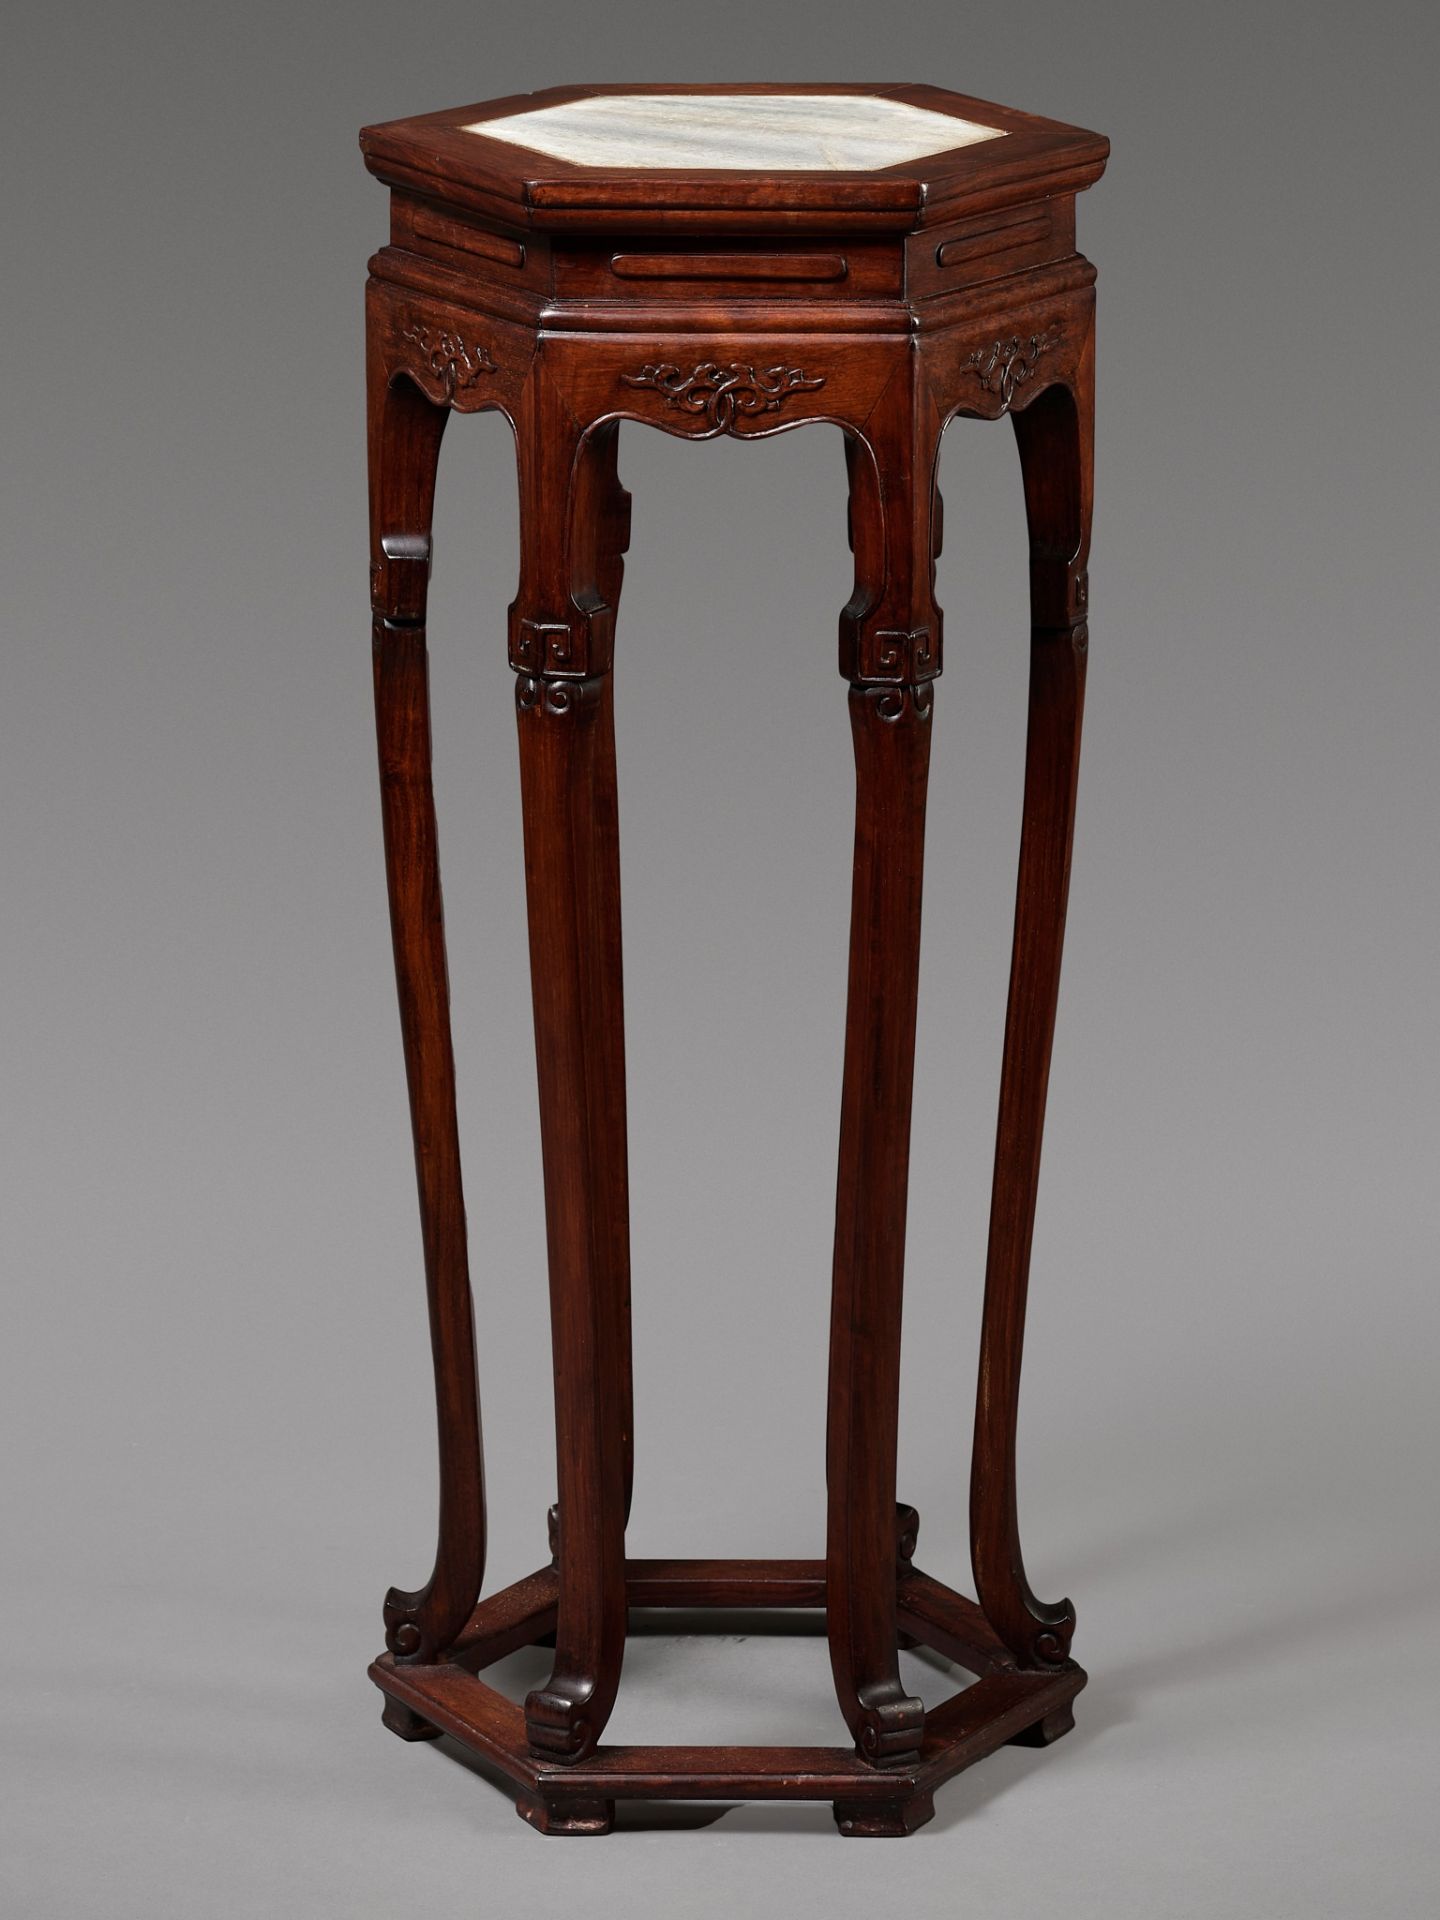 A MARBLE-INSET LACQUERED HARDWOOD INCENSE STAND, XIANGJI, 19TH CENTURY